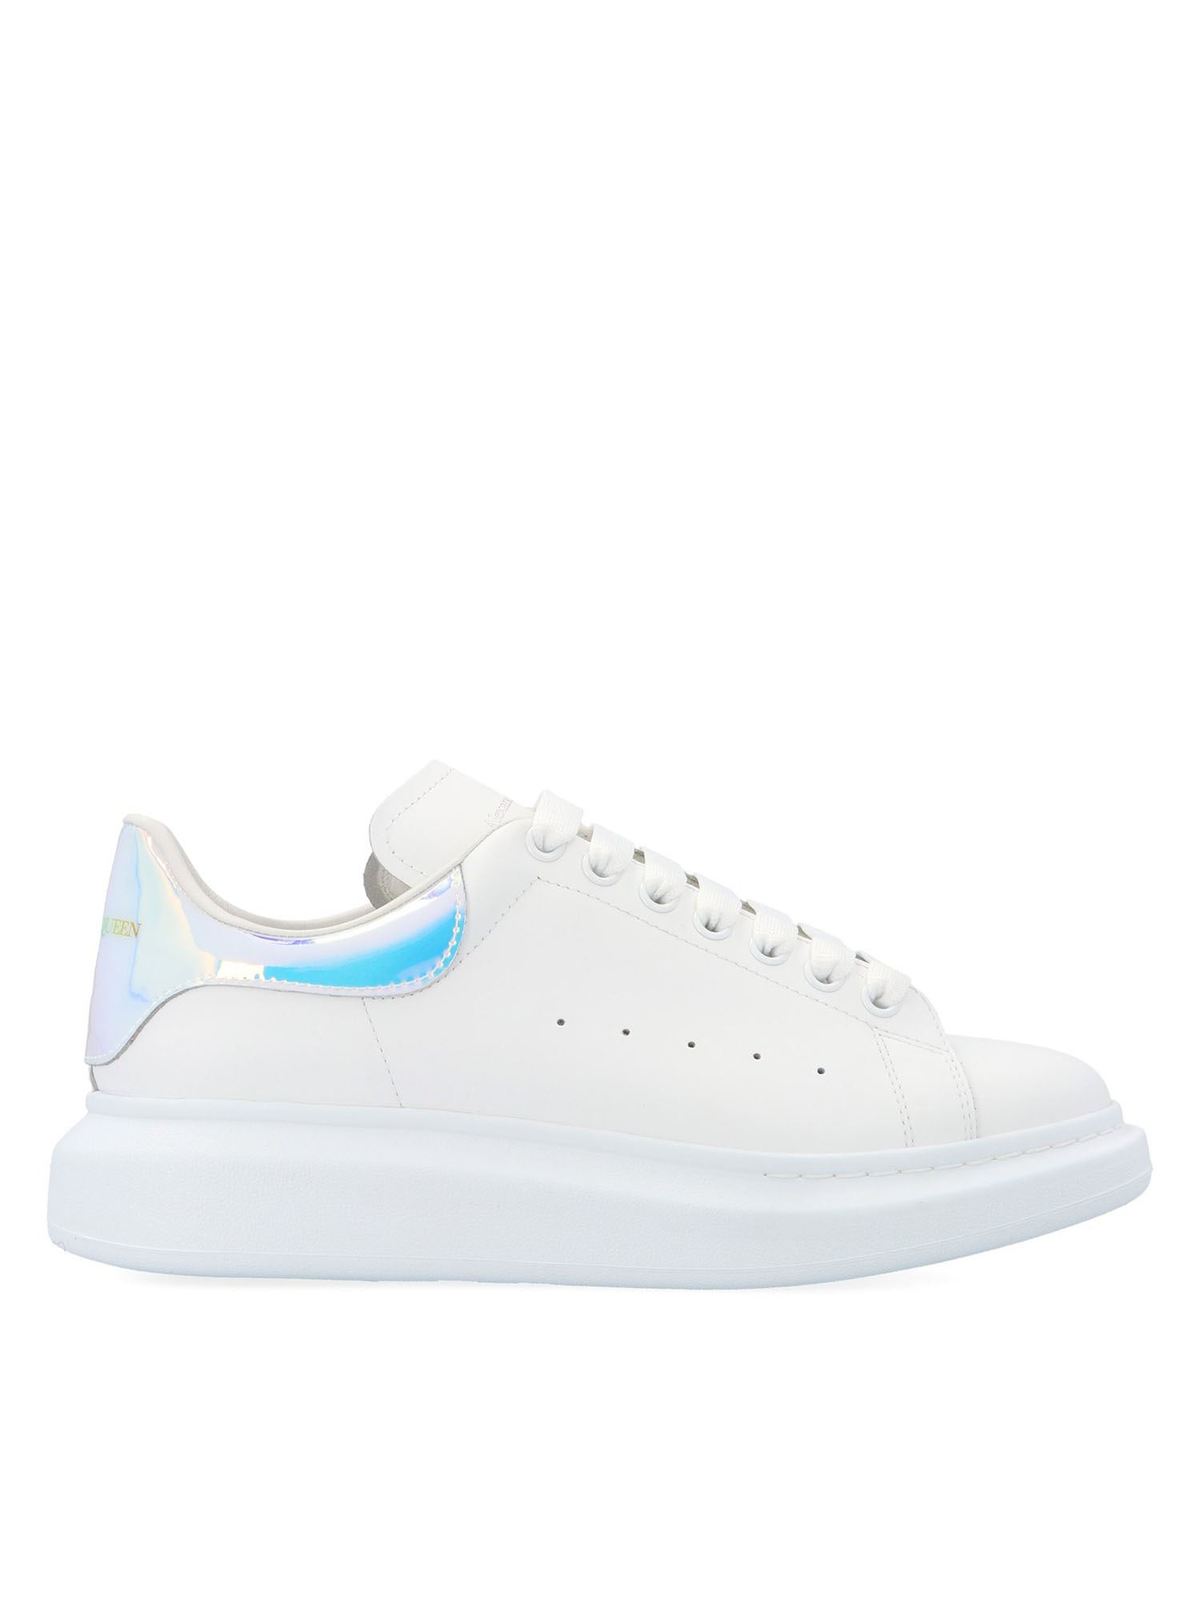 Alexander Mcqueen Oversize Sneakers In White And Holographic In Blanco